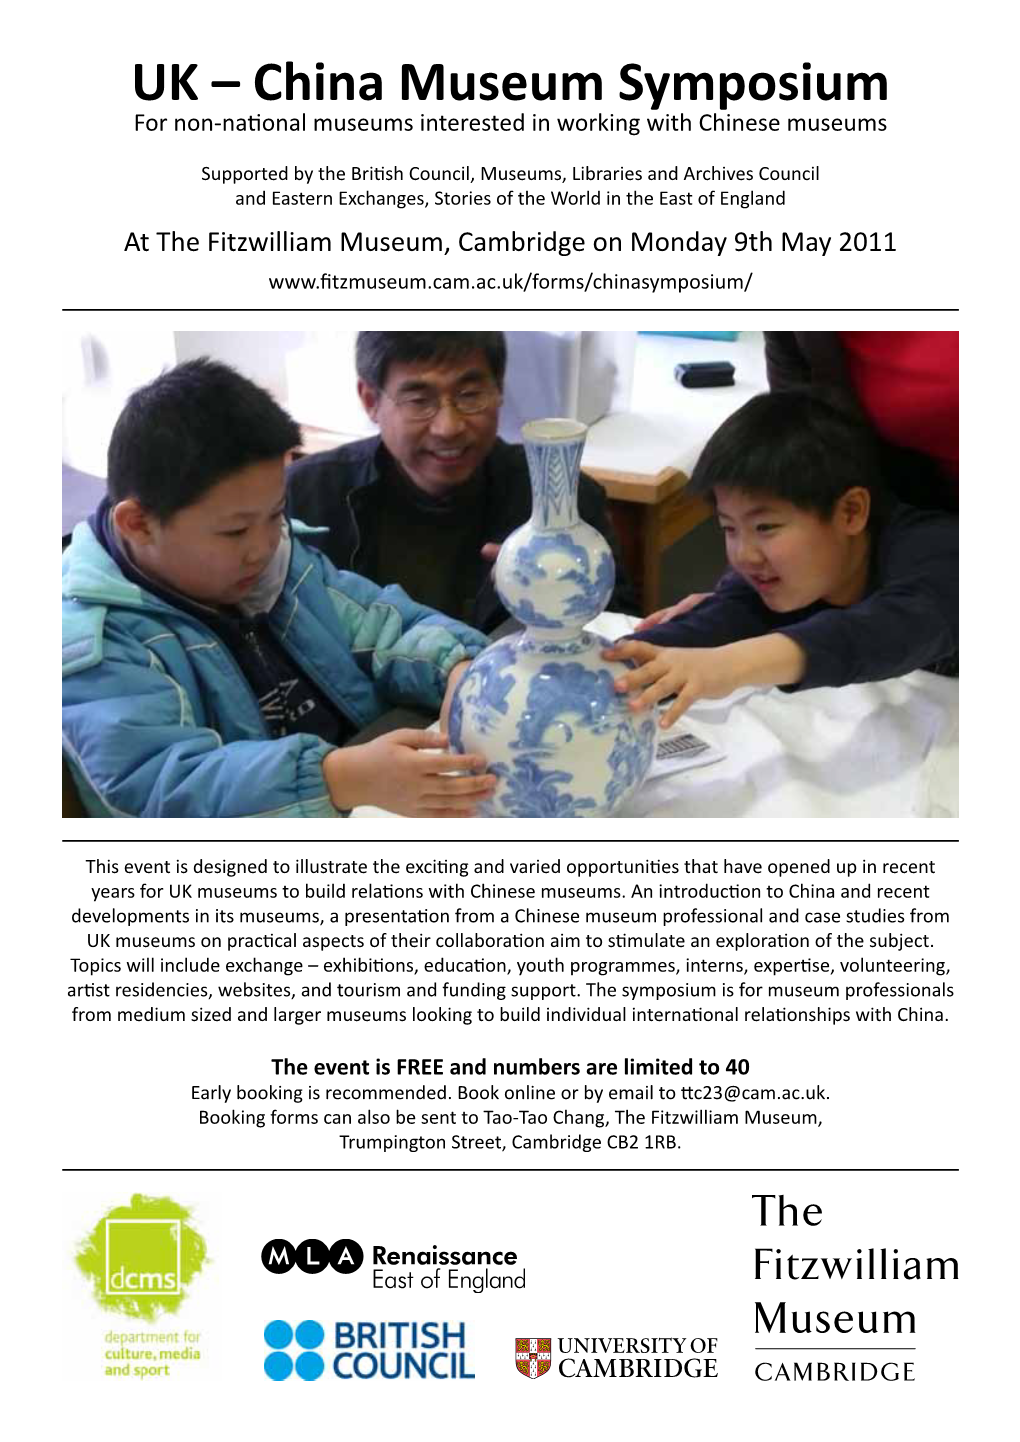 UK – China Museum Symposium for Non-National Museums Interested in Working with Chinese Museums